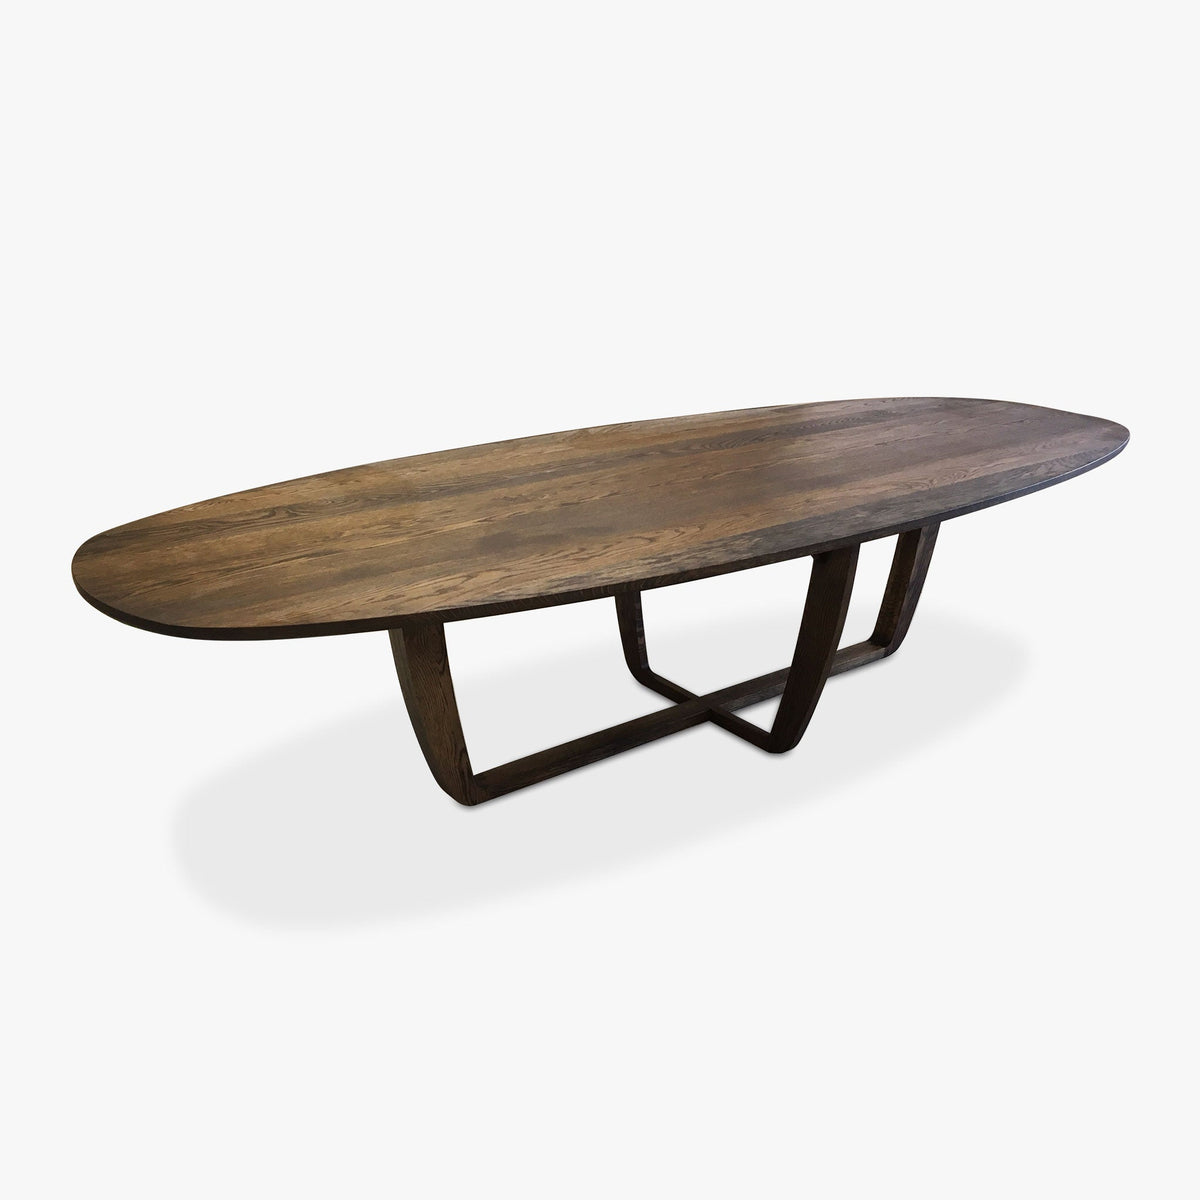 Sula Dining Table